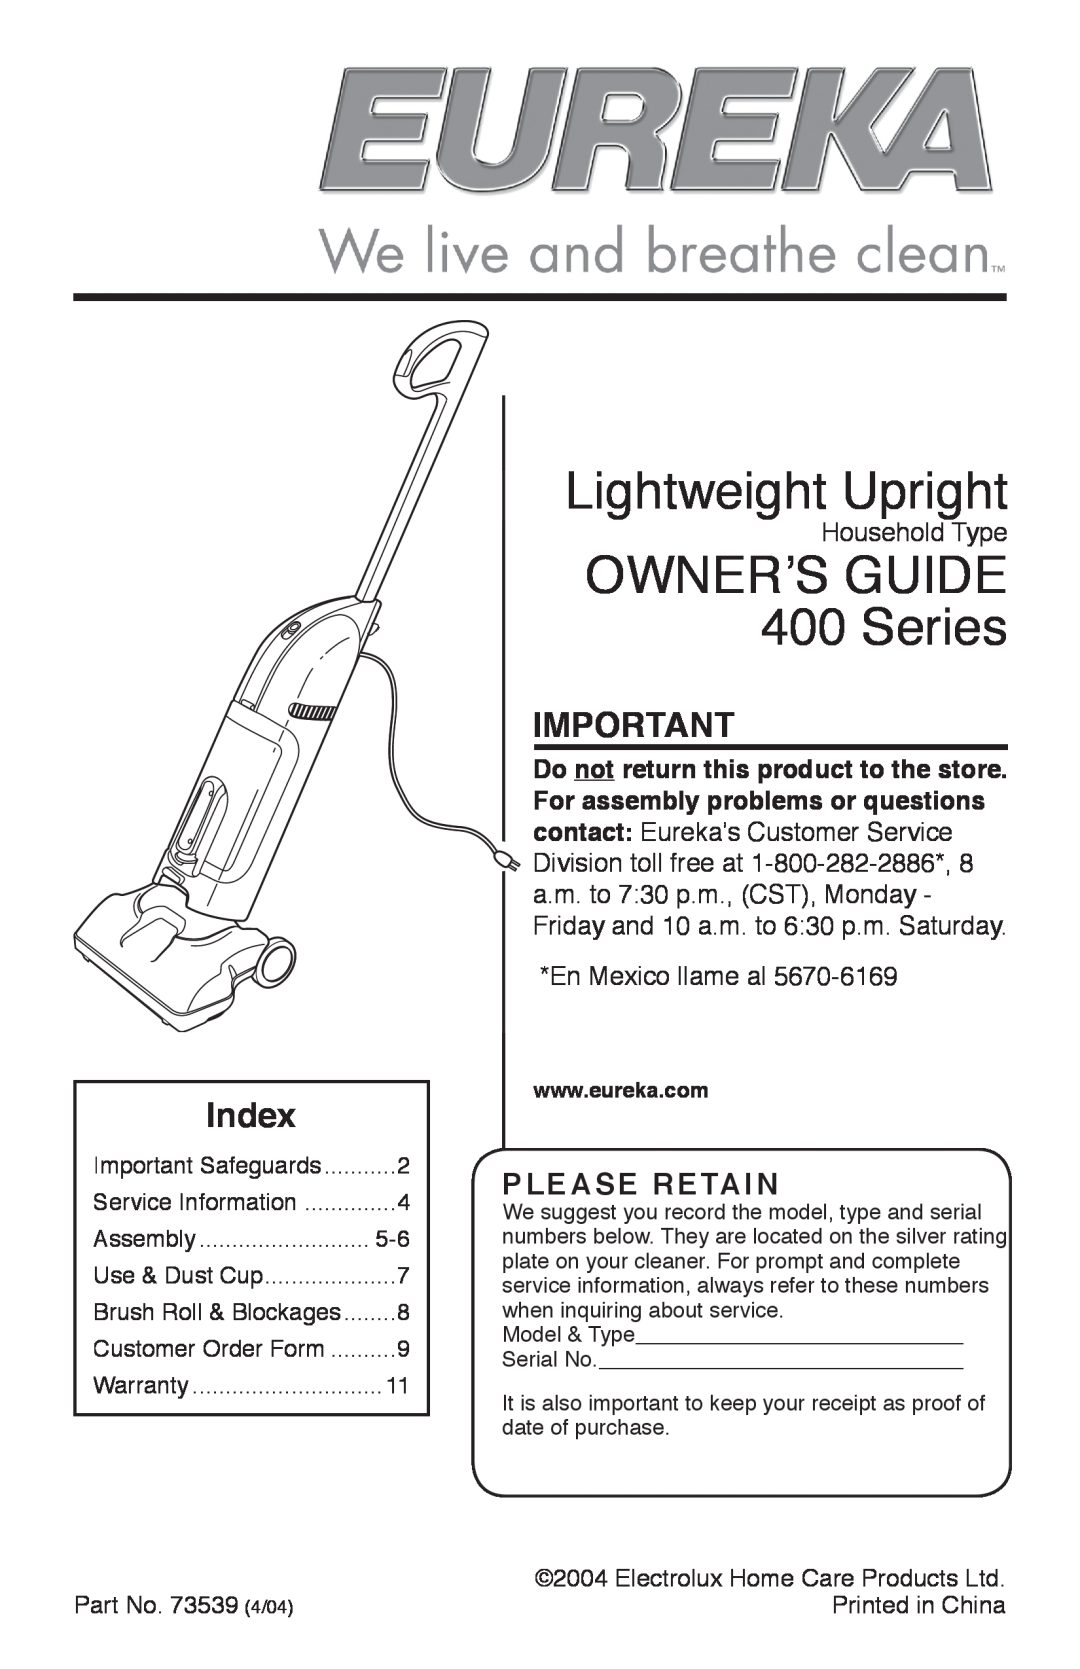 Eureka 400 warranty Lightweight Upright, Index, Series, Do not return this product to the store, Vacuum Cleaner 